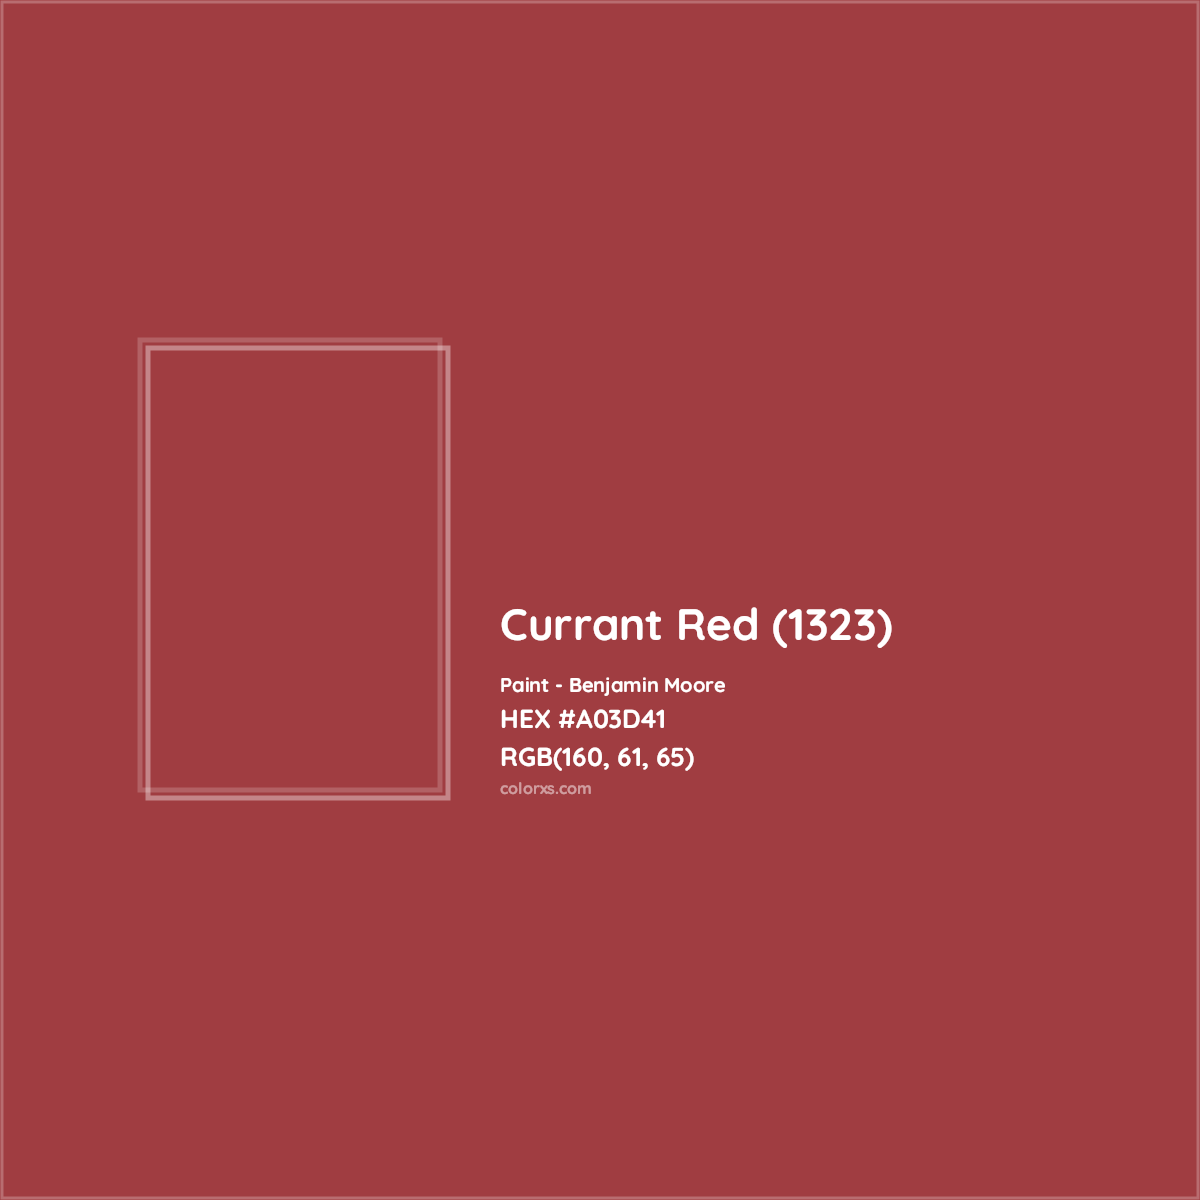 Benjamin Moore Currant Red (1323) Paint color codes, similar paints and  colors 